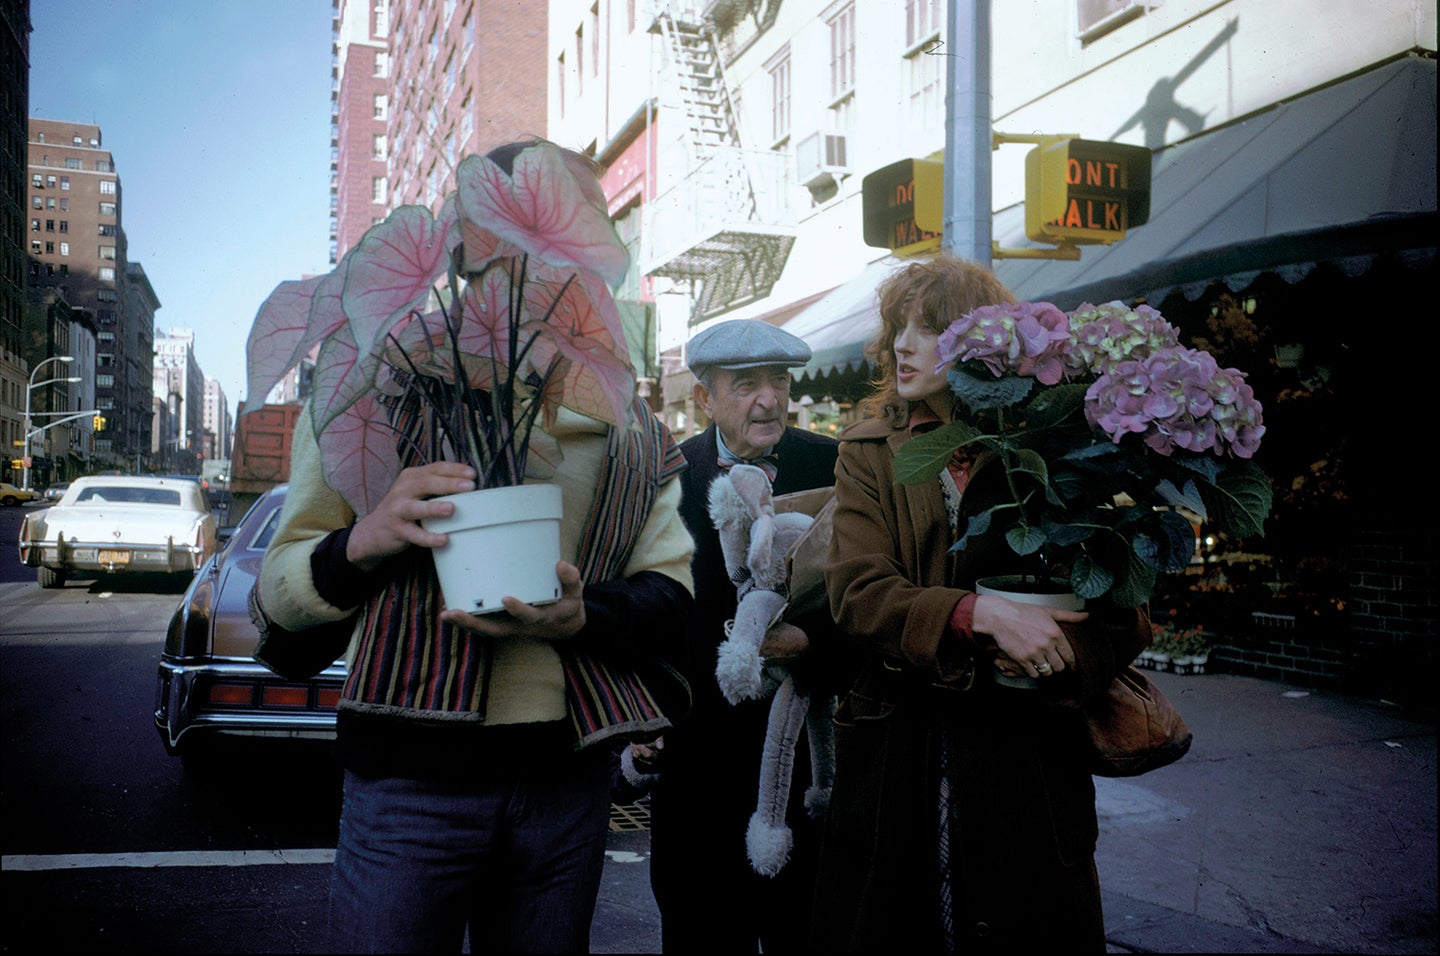 People carrying plants in New York